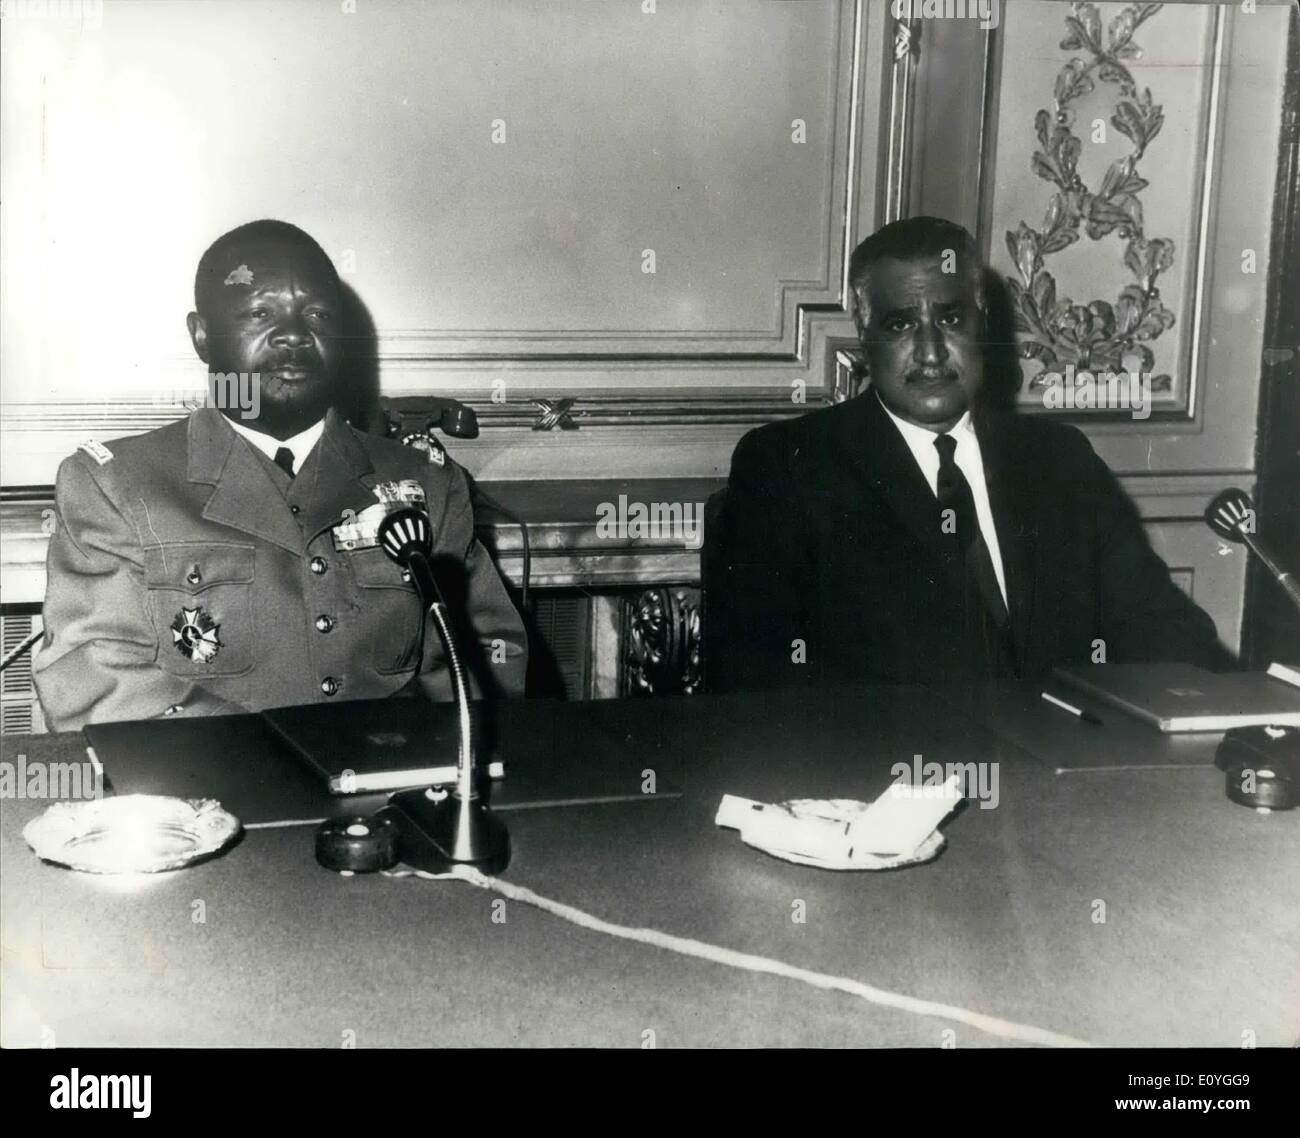 Apr. 14, 1970 - April 14th 1970 President Bokassa of Central African Republic on visit to Cairo. President Jean-Bedel Bokassa of the Central African Republic, pictured on left, with President Nasser, at Kobbah Palace, Cairo, last Thursday, when formal talks were held between them on the Middle East crisis and bilateral ties. President Bokassa was on a several days visit to Cairo. Stock Photo